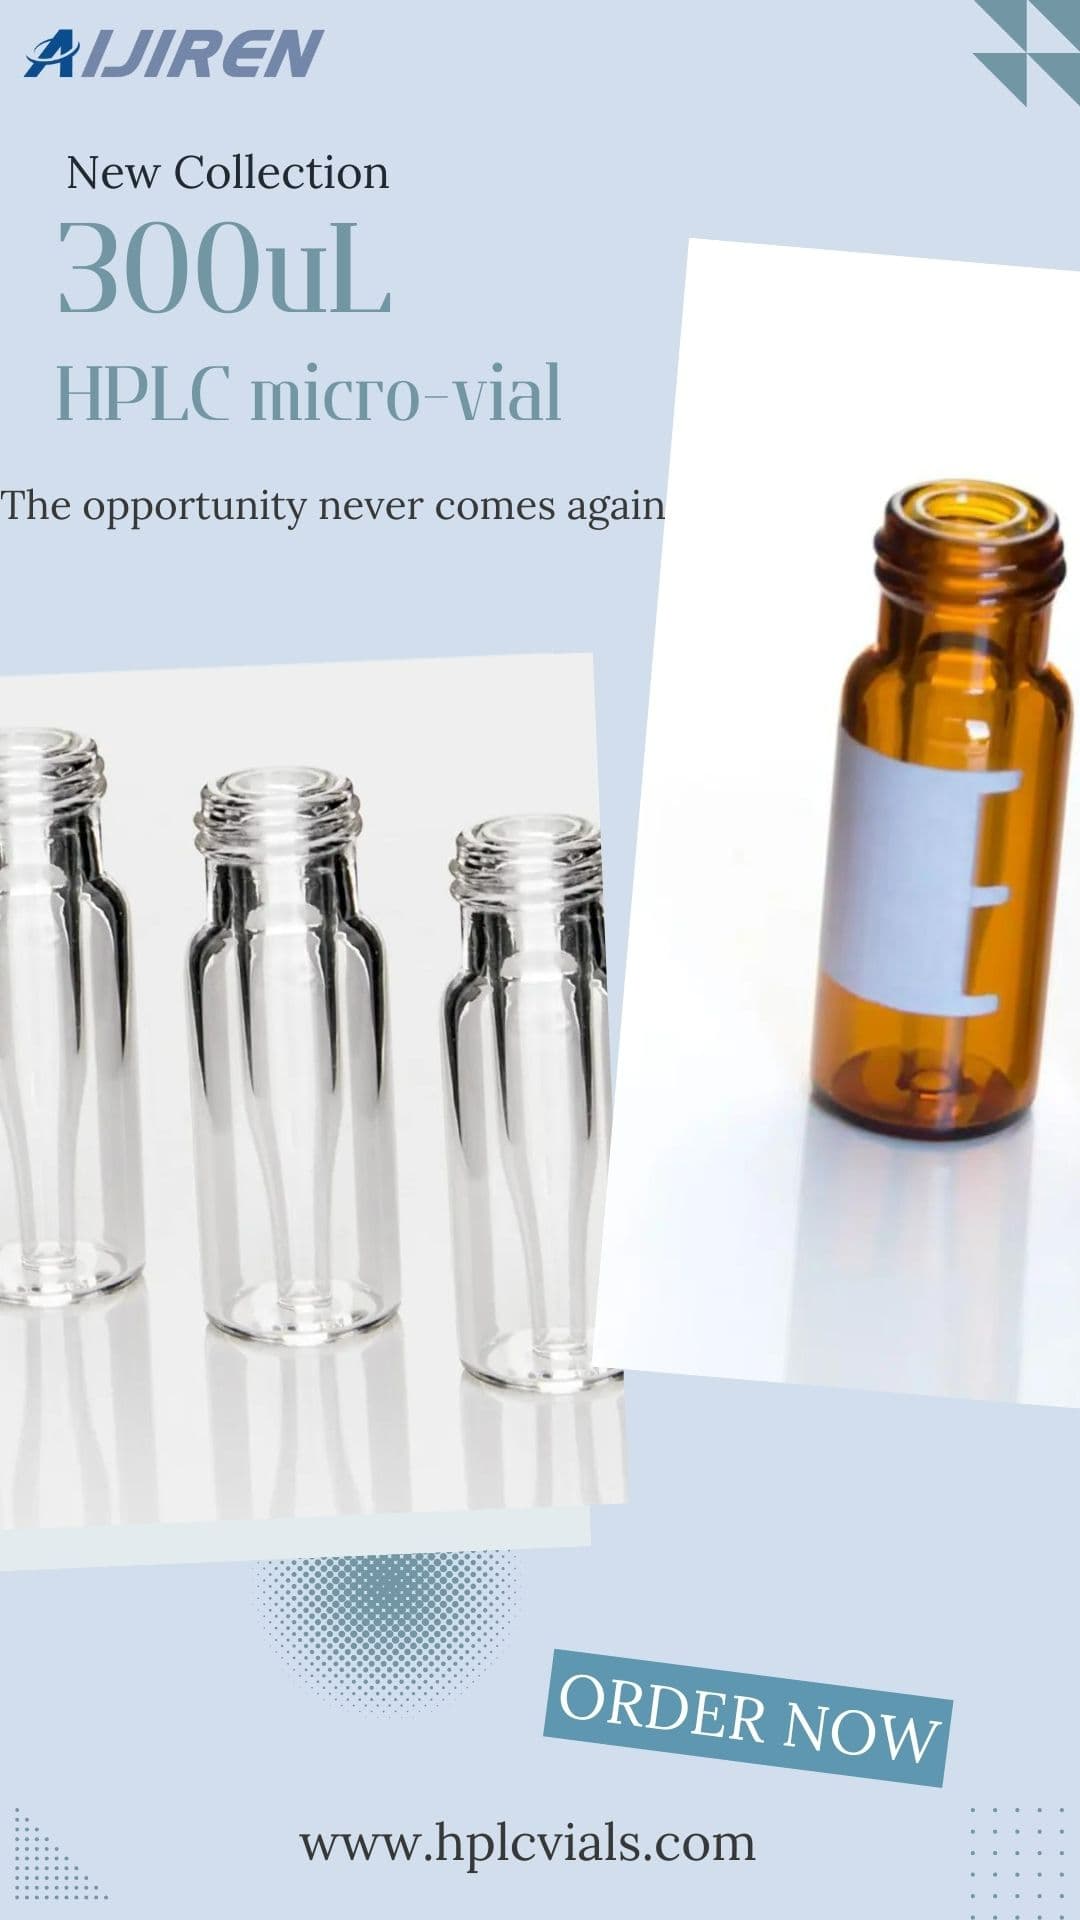 20ml headspace vial9-425 Screw thread Cap 300uL borosilicate glass vials HPLC micro-vial integrated insert with label